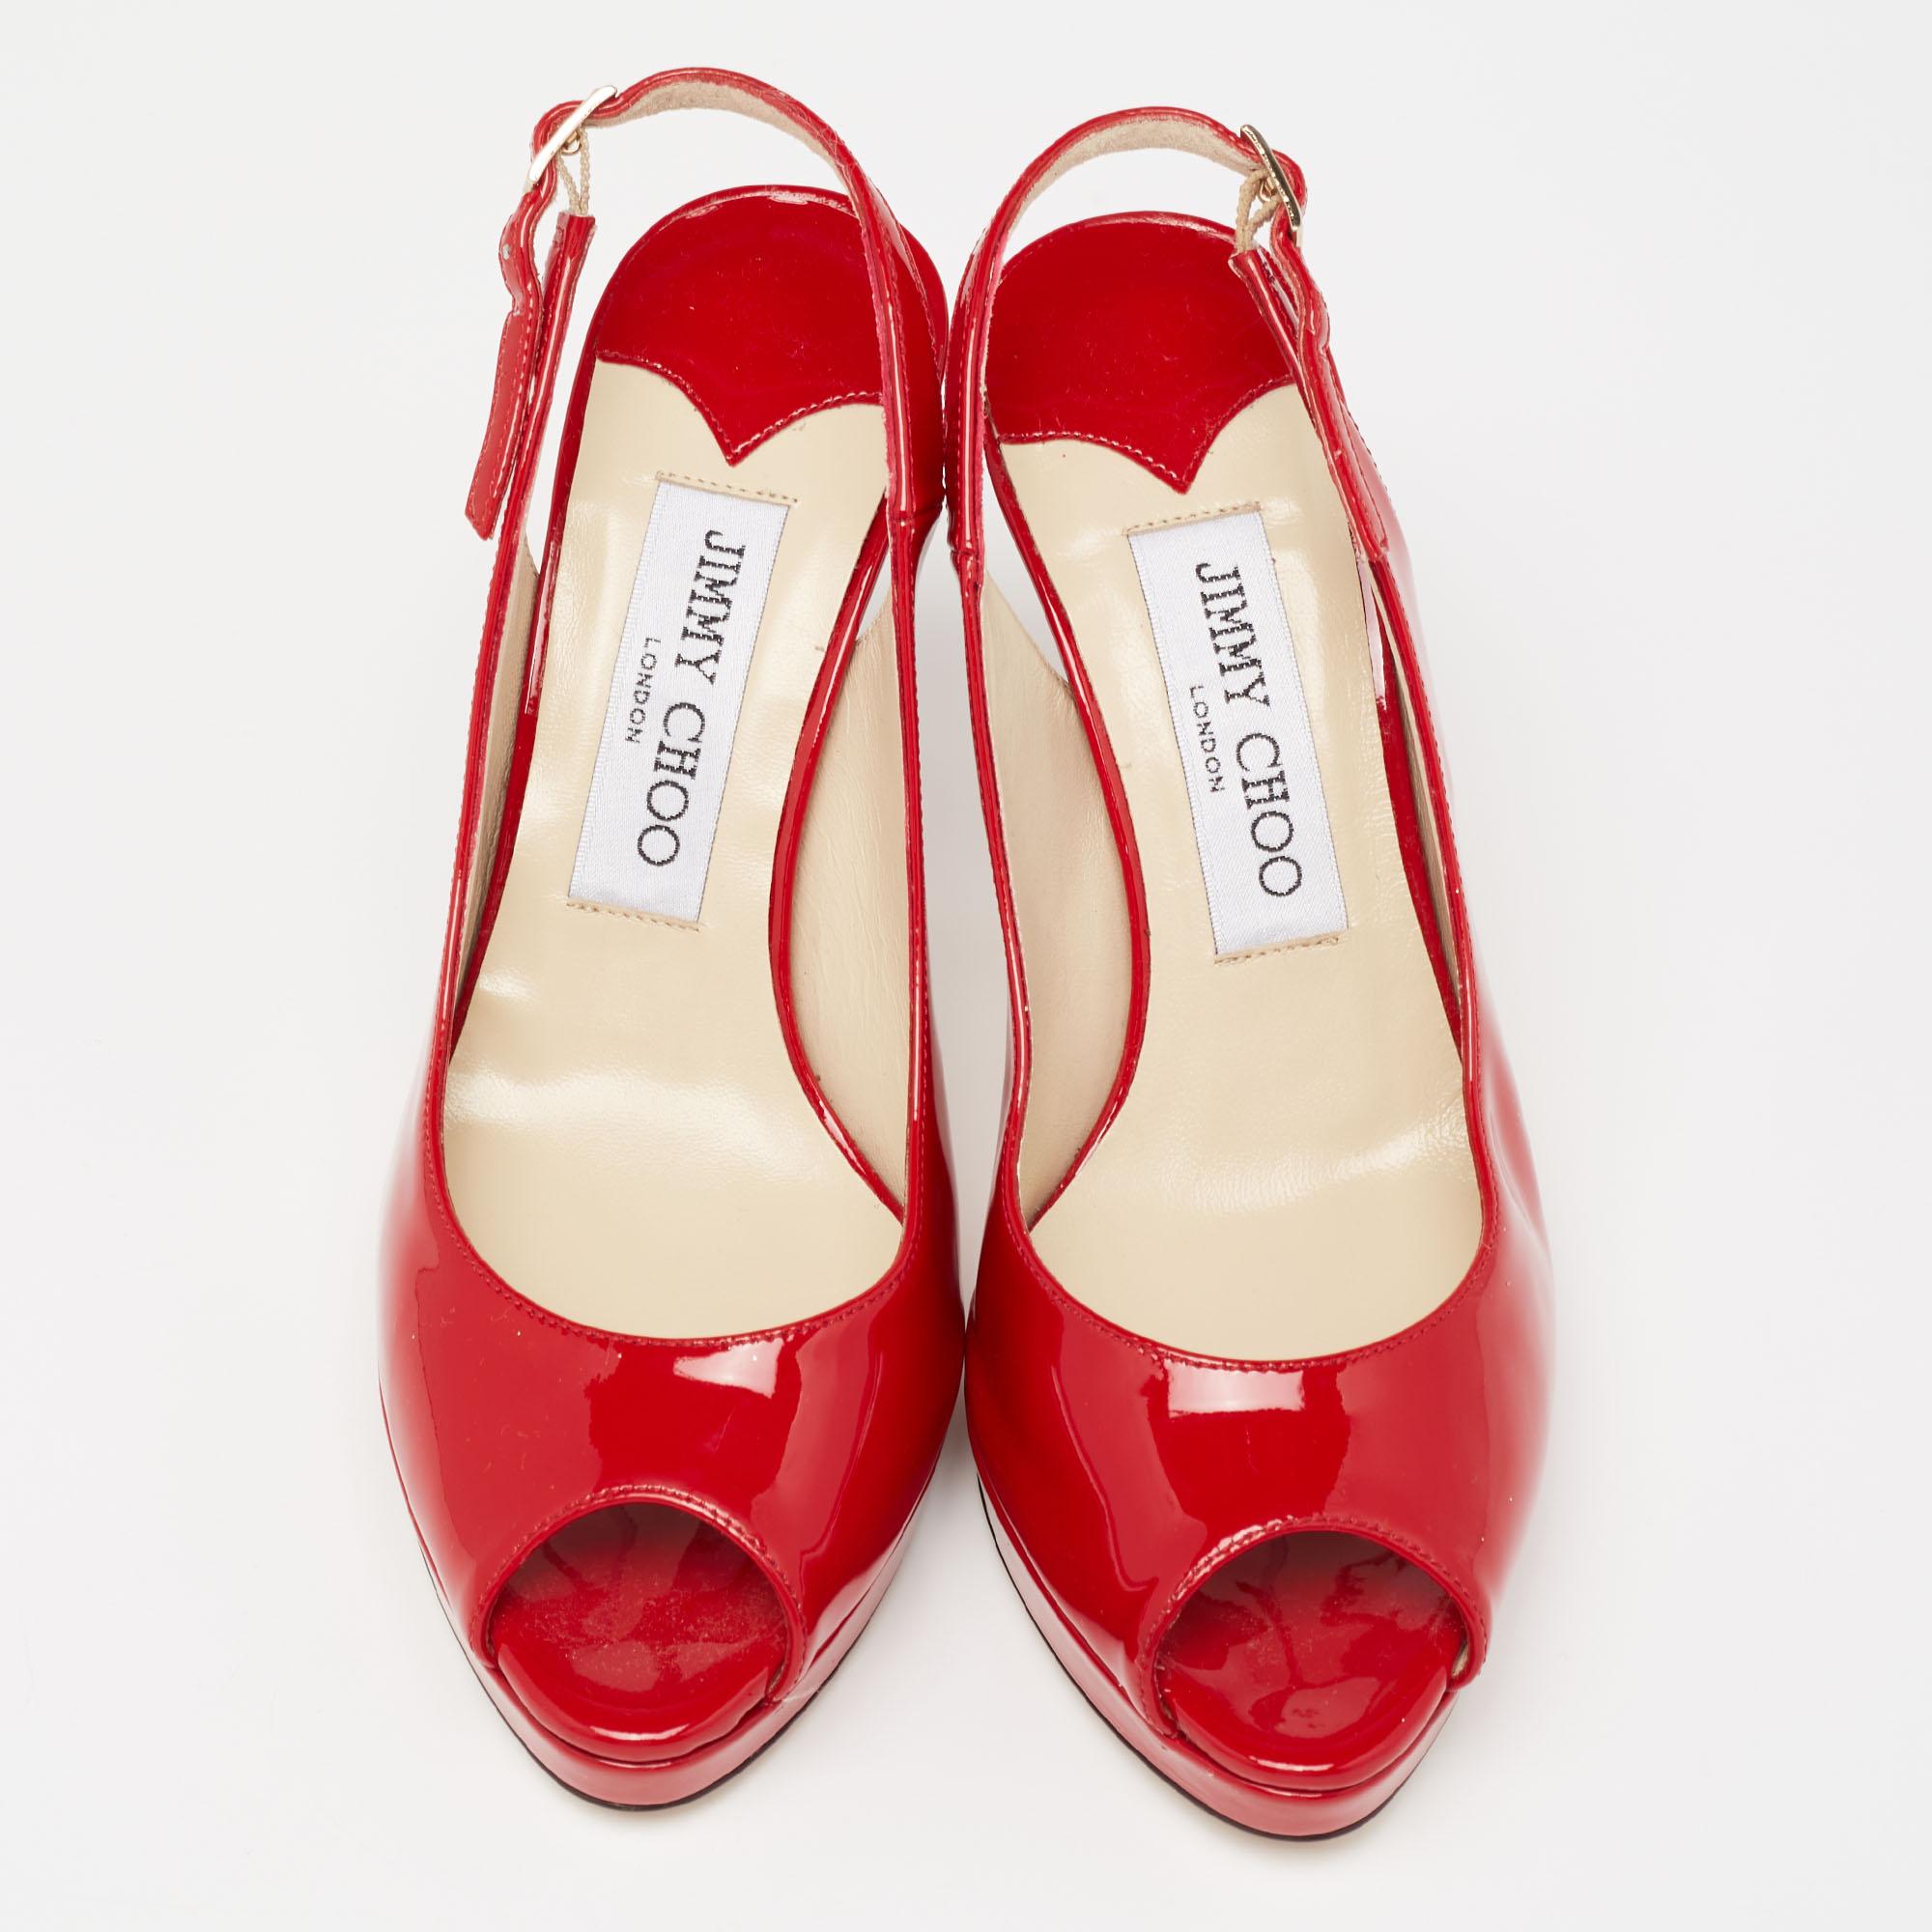 This timeless pair of sandals from Jimmy Choo looks even better on the feet. The shoes have an elegant design made from red patent leather, with low platforms, high heels, and buckle slingbacks for a sleek finish.

Includes: Original Dustbag